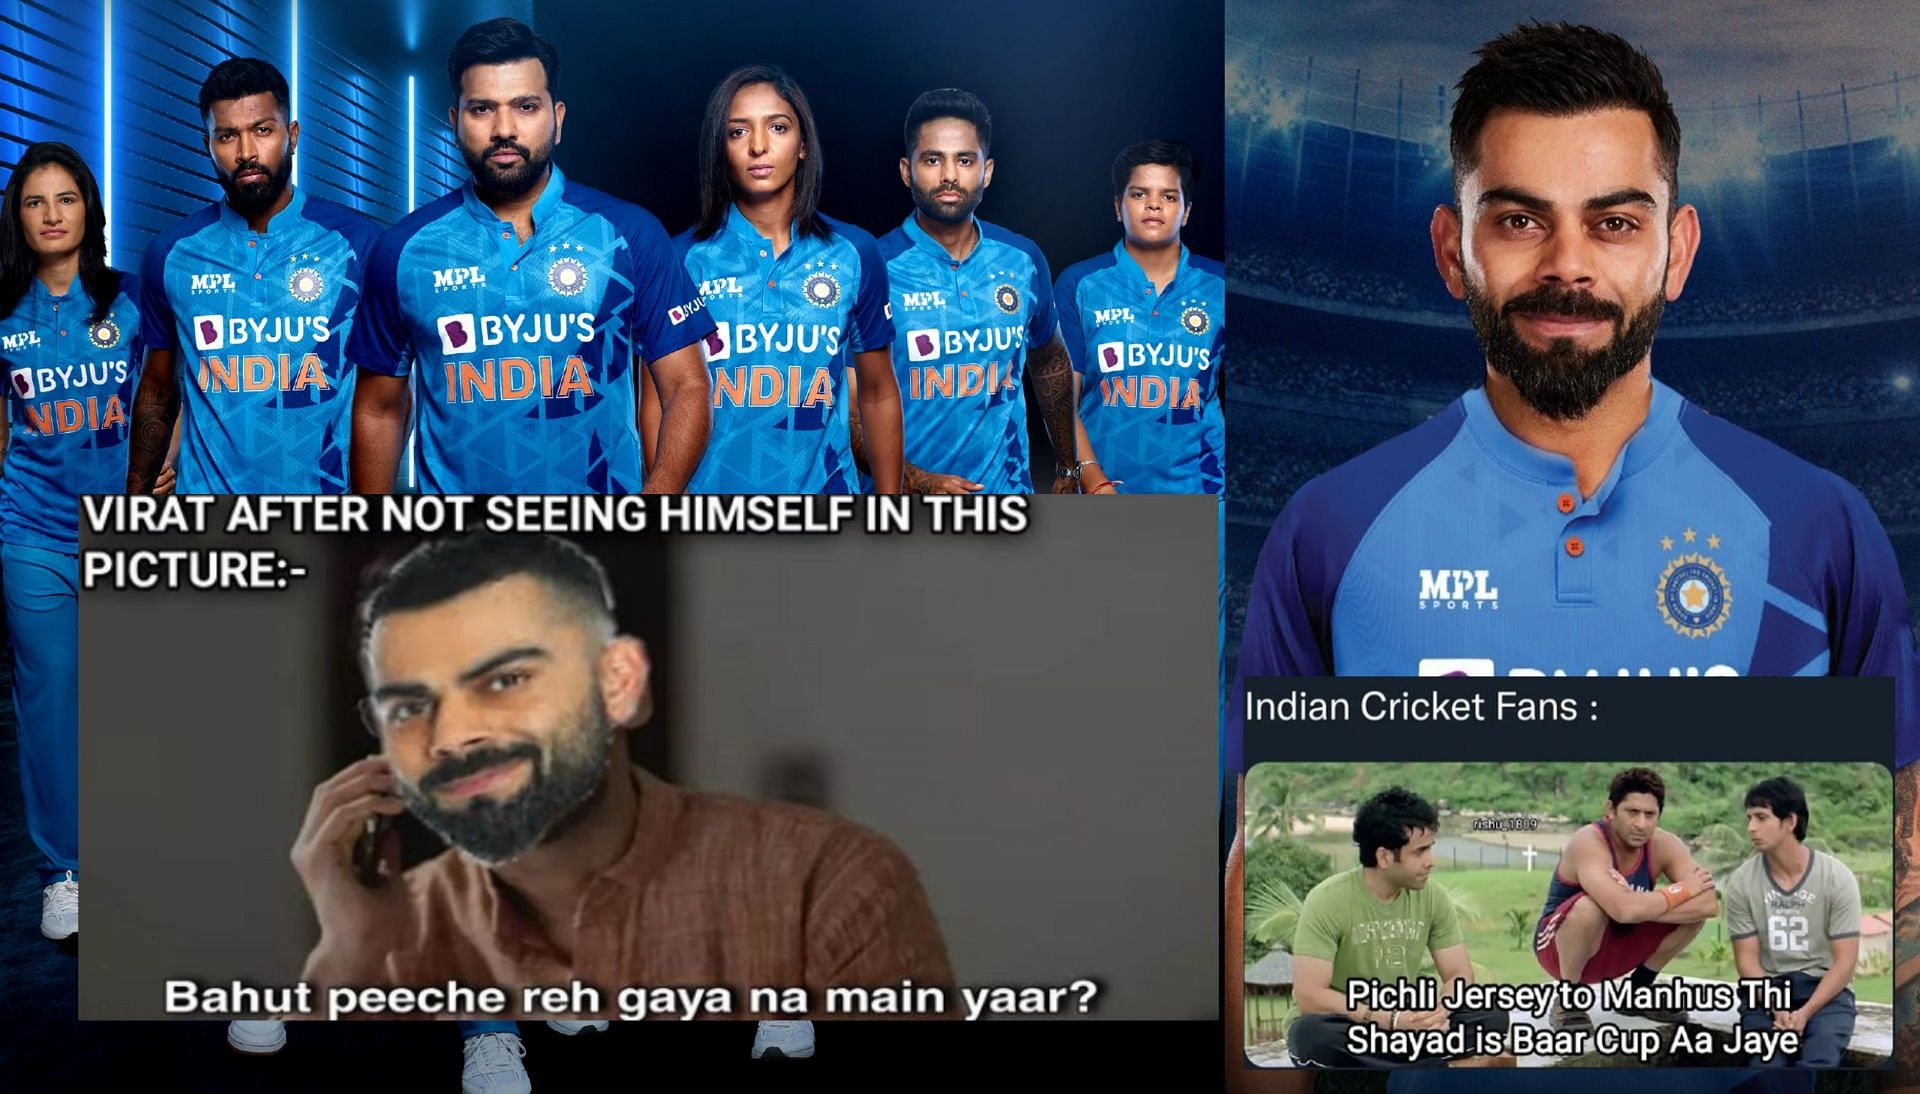 Fans voice their opinions of Team India